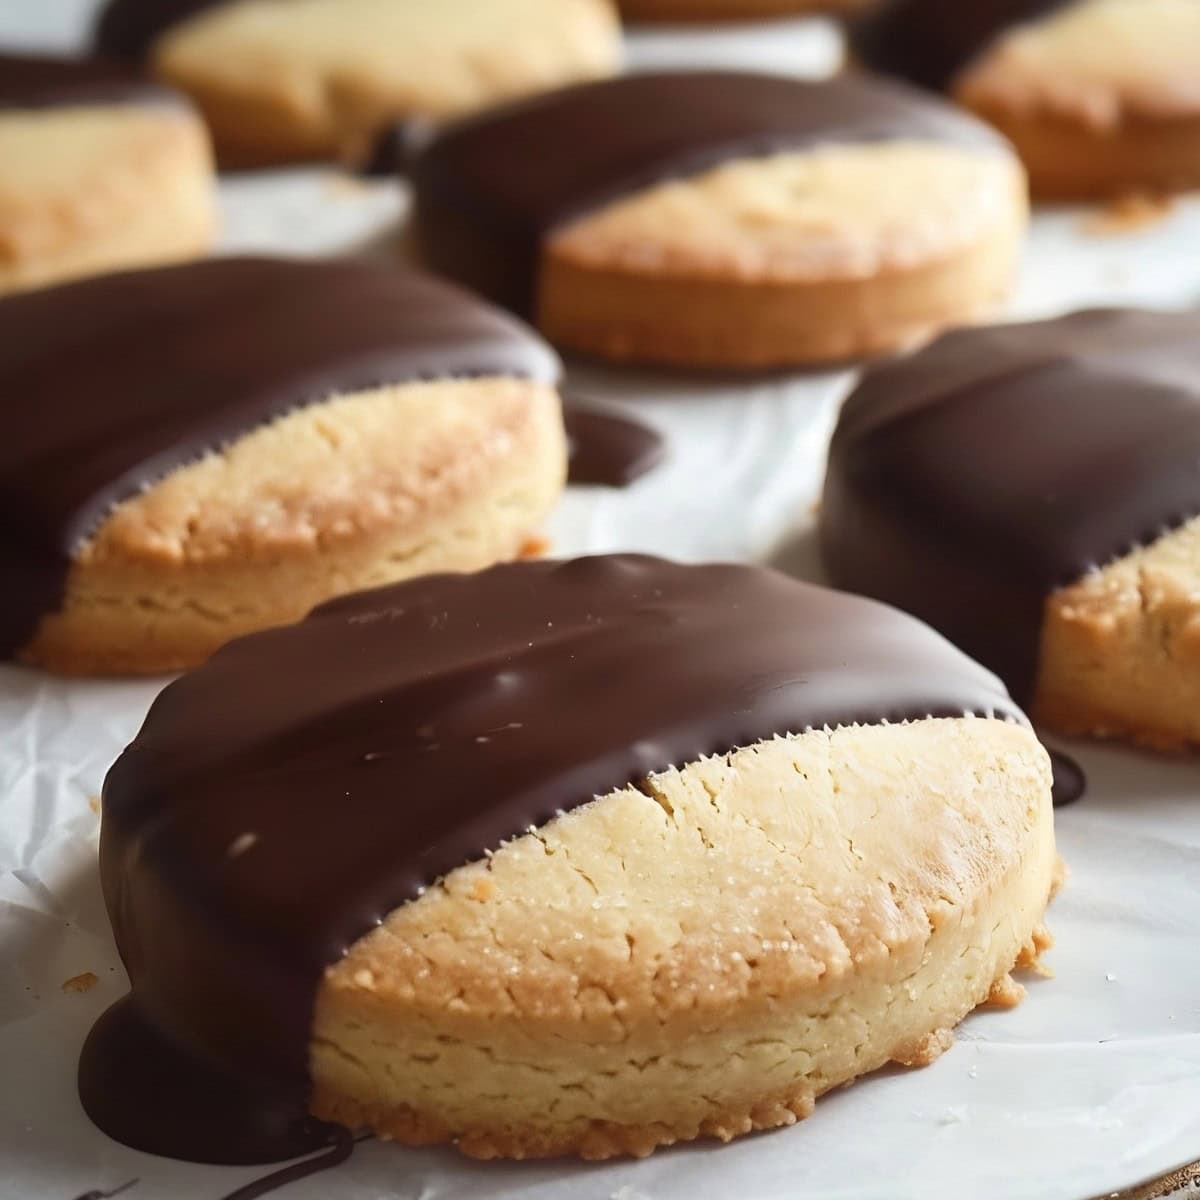 Super Close Up of Chocolate-Dipped Shortbread Cookies with Shiny Chocolate and Sugar Granules